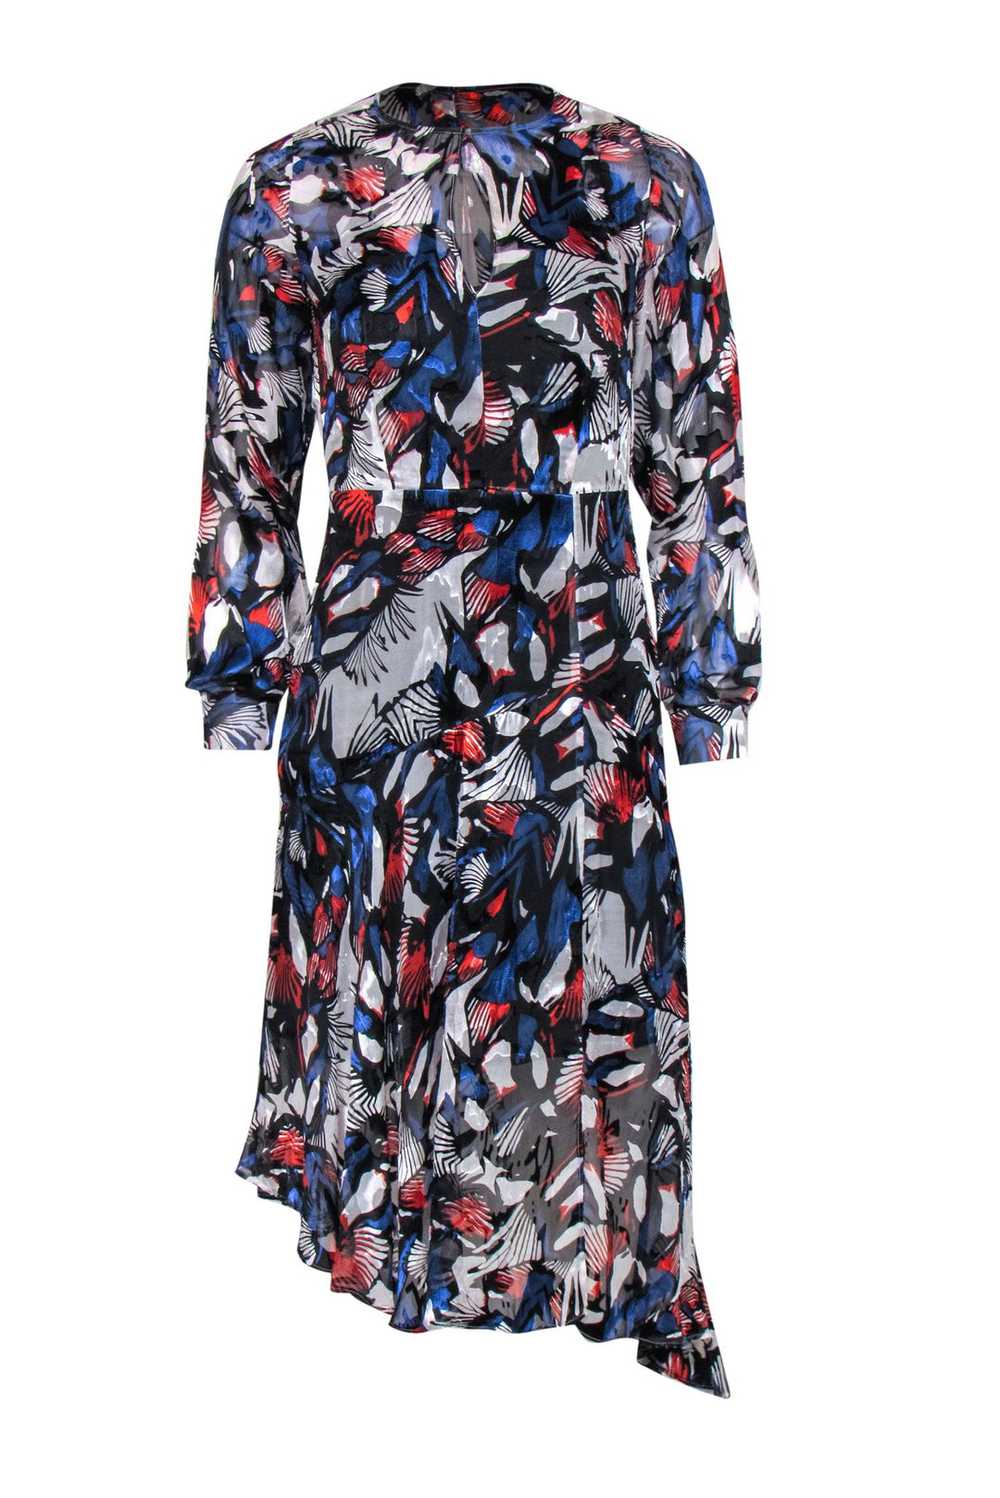 Reiss - Red, White & Blue Floral Print Sheer Long… - image 1